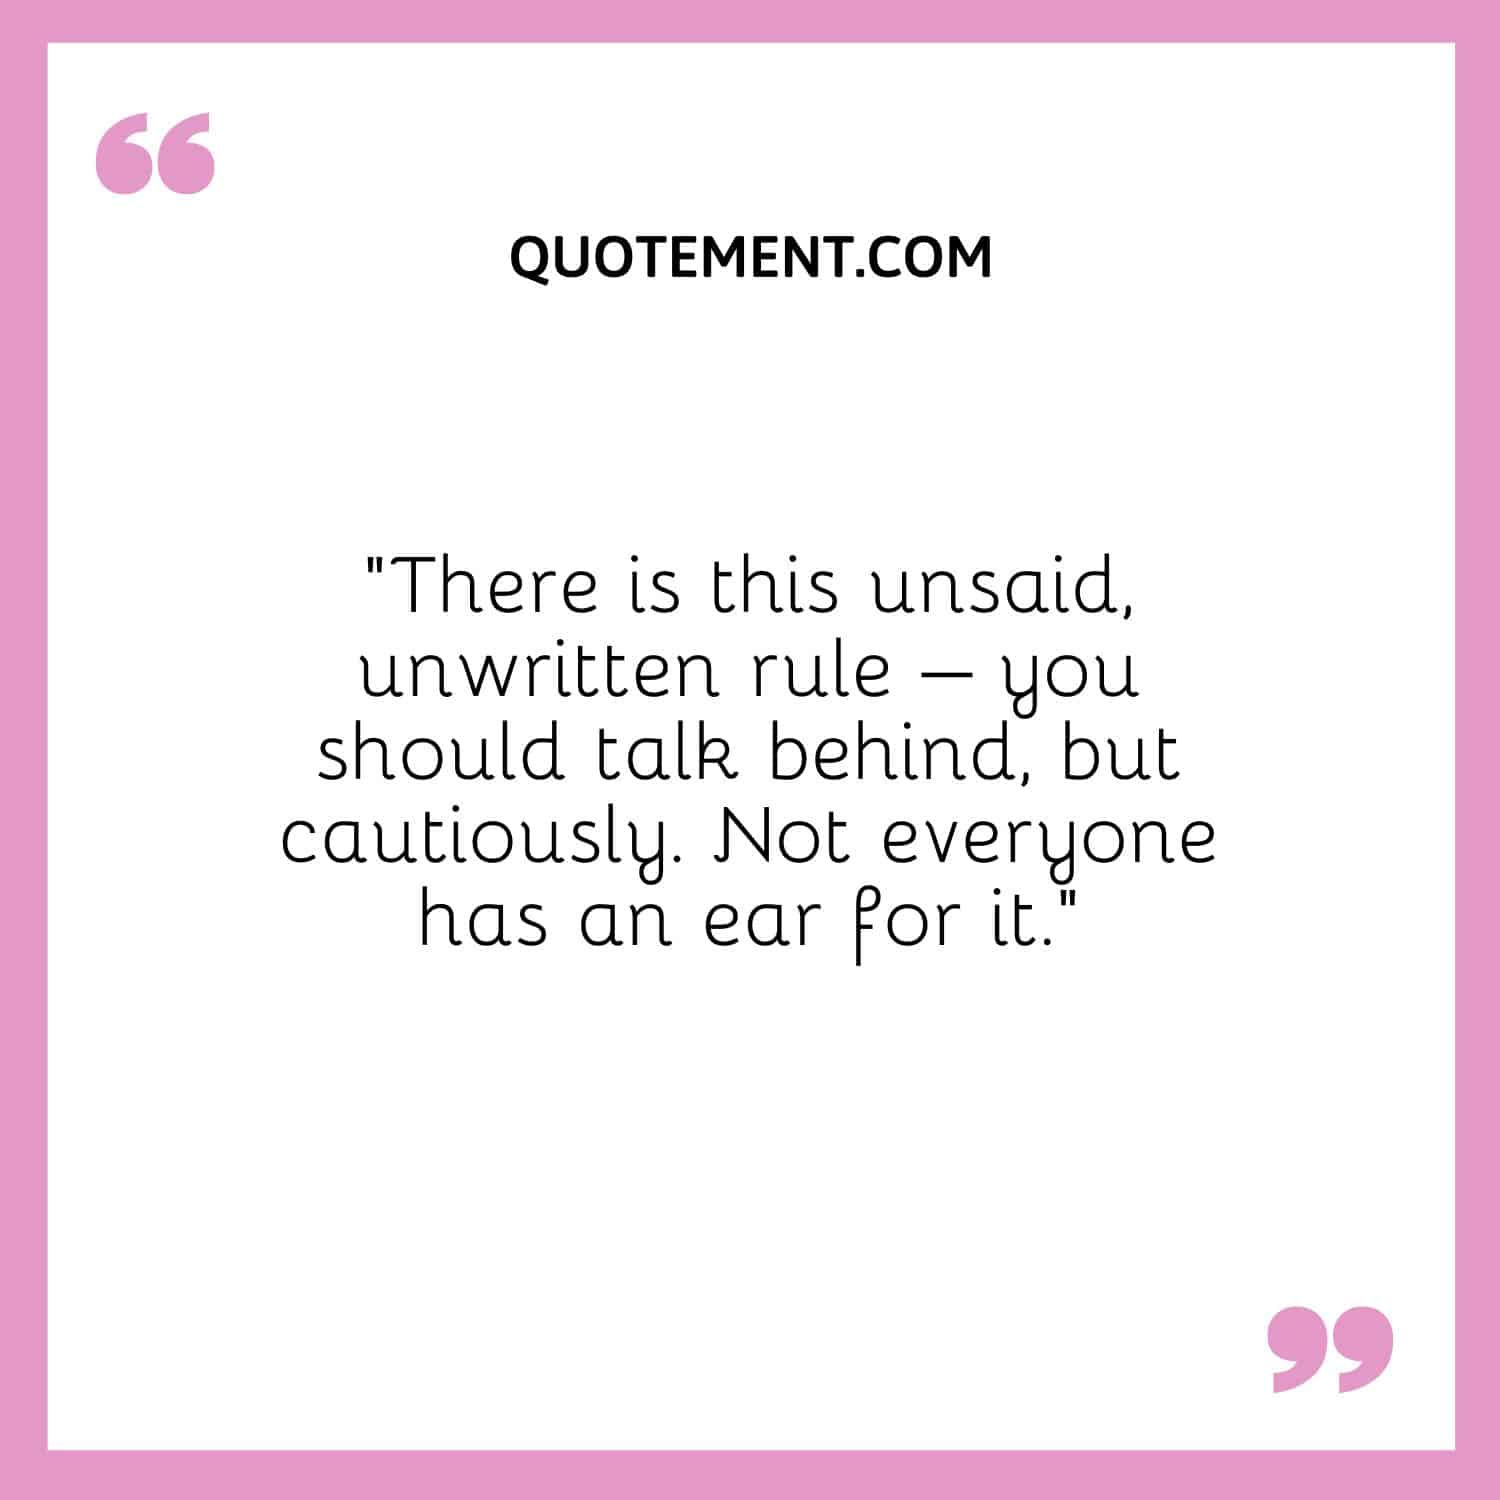 “There is this unsaid, unwritten rule – you should talk behind, but cautiously. Not everyone has an ear for it.”